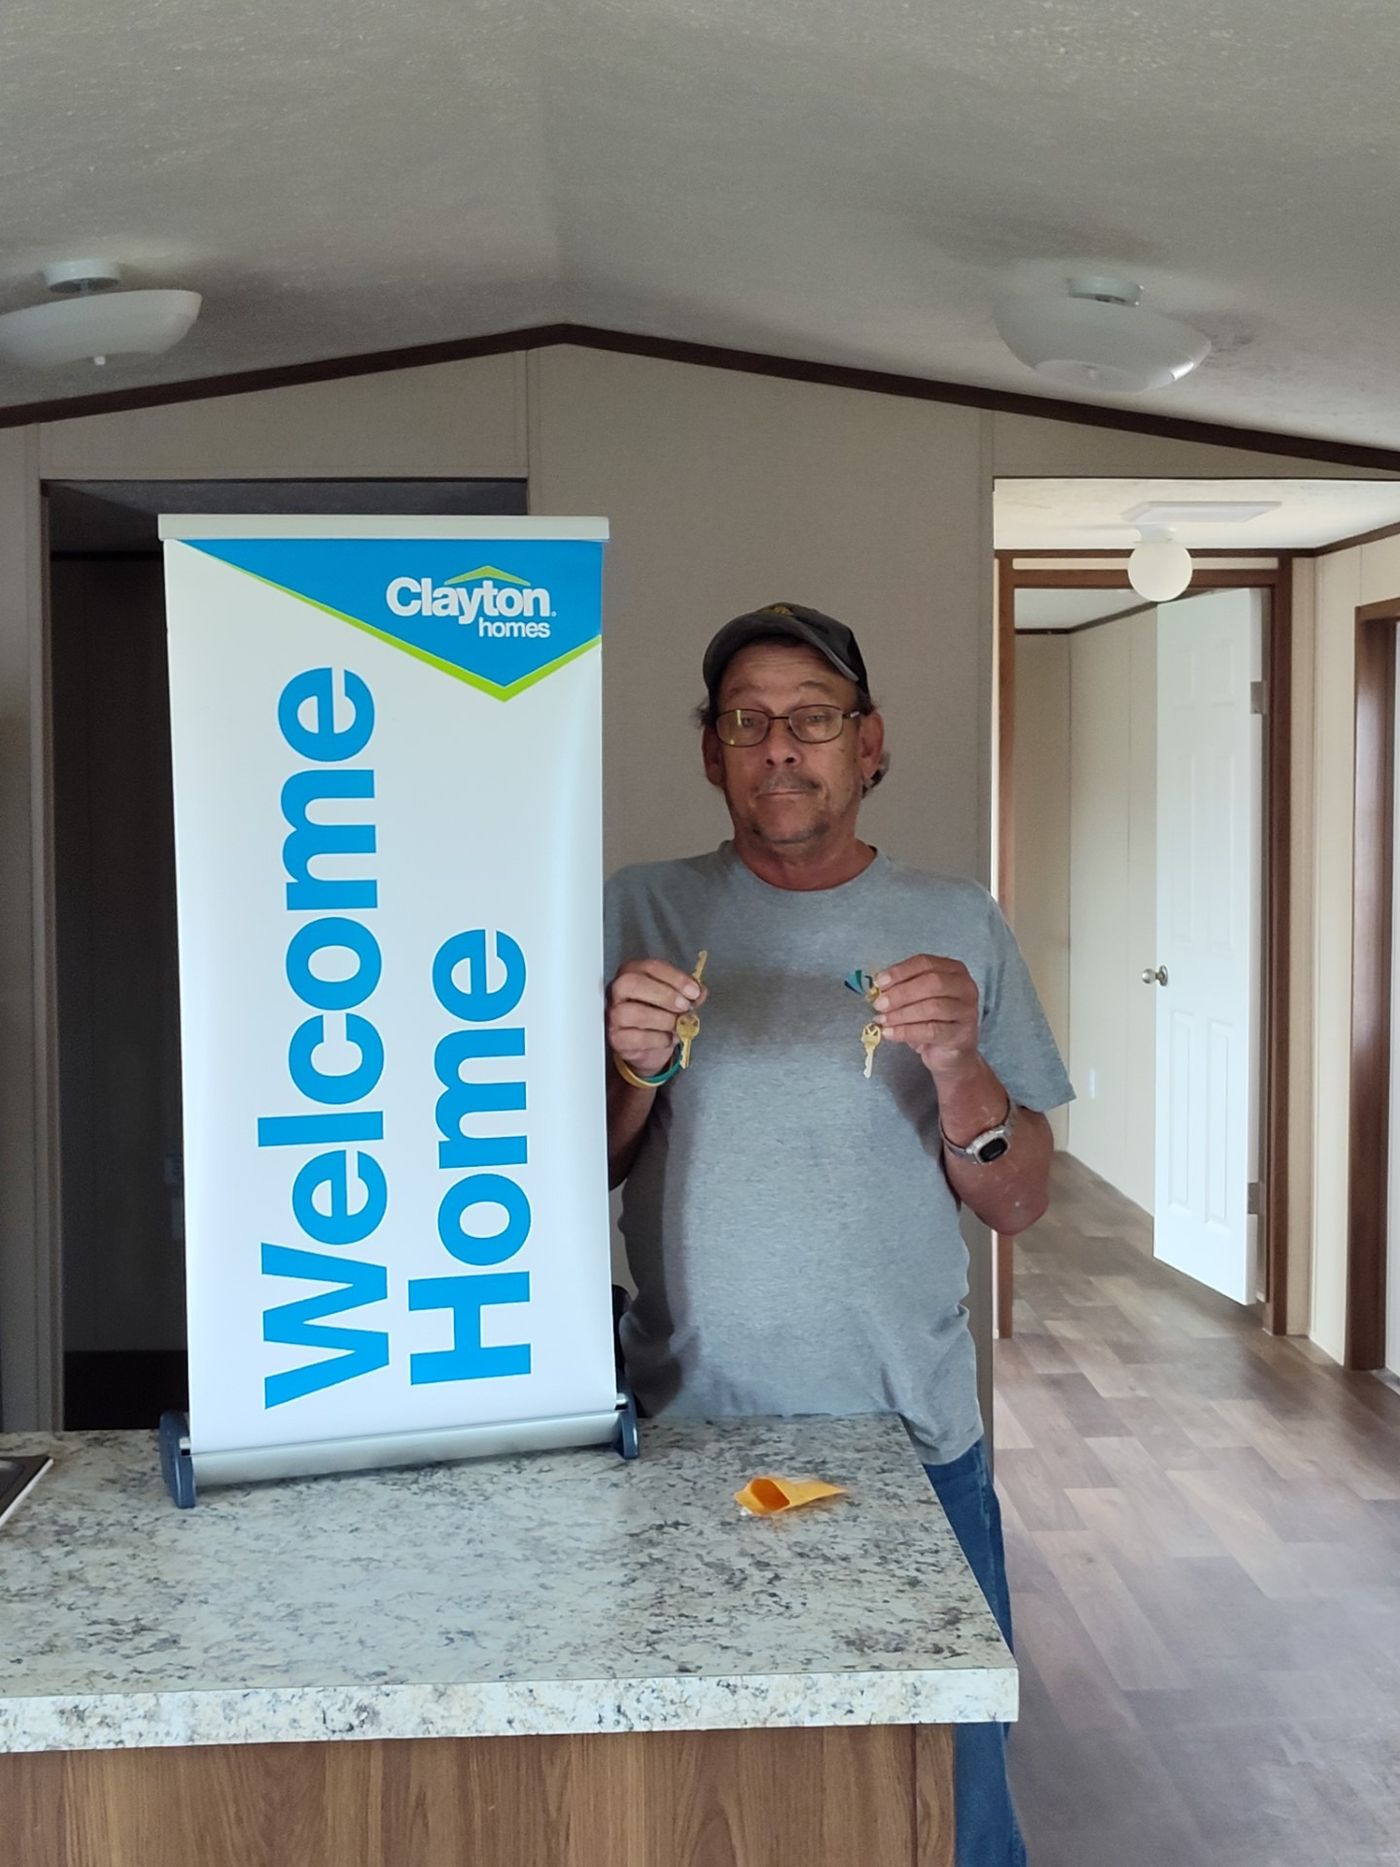 IRVIN B. welcome home image